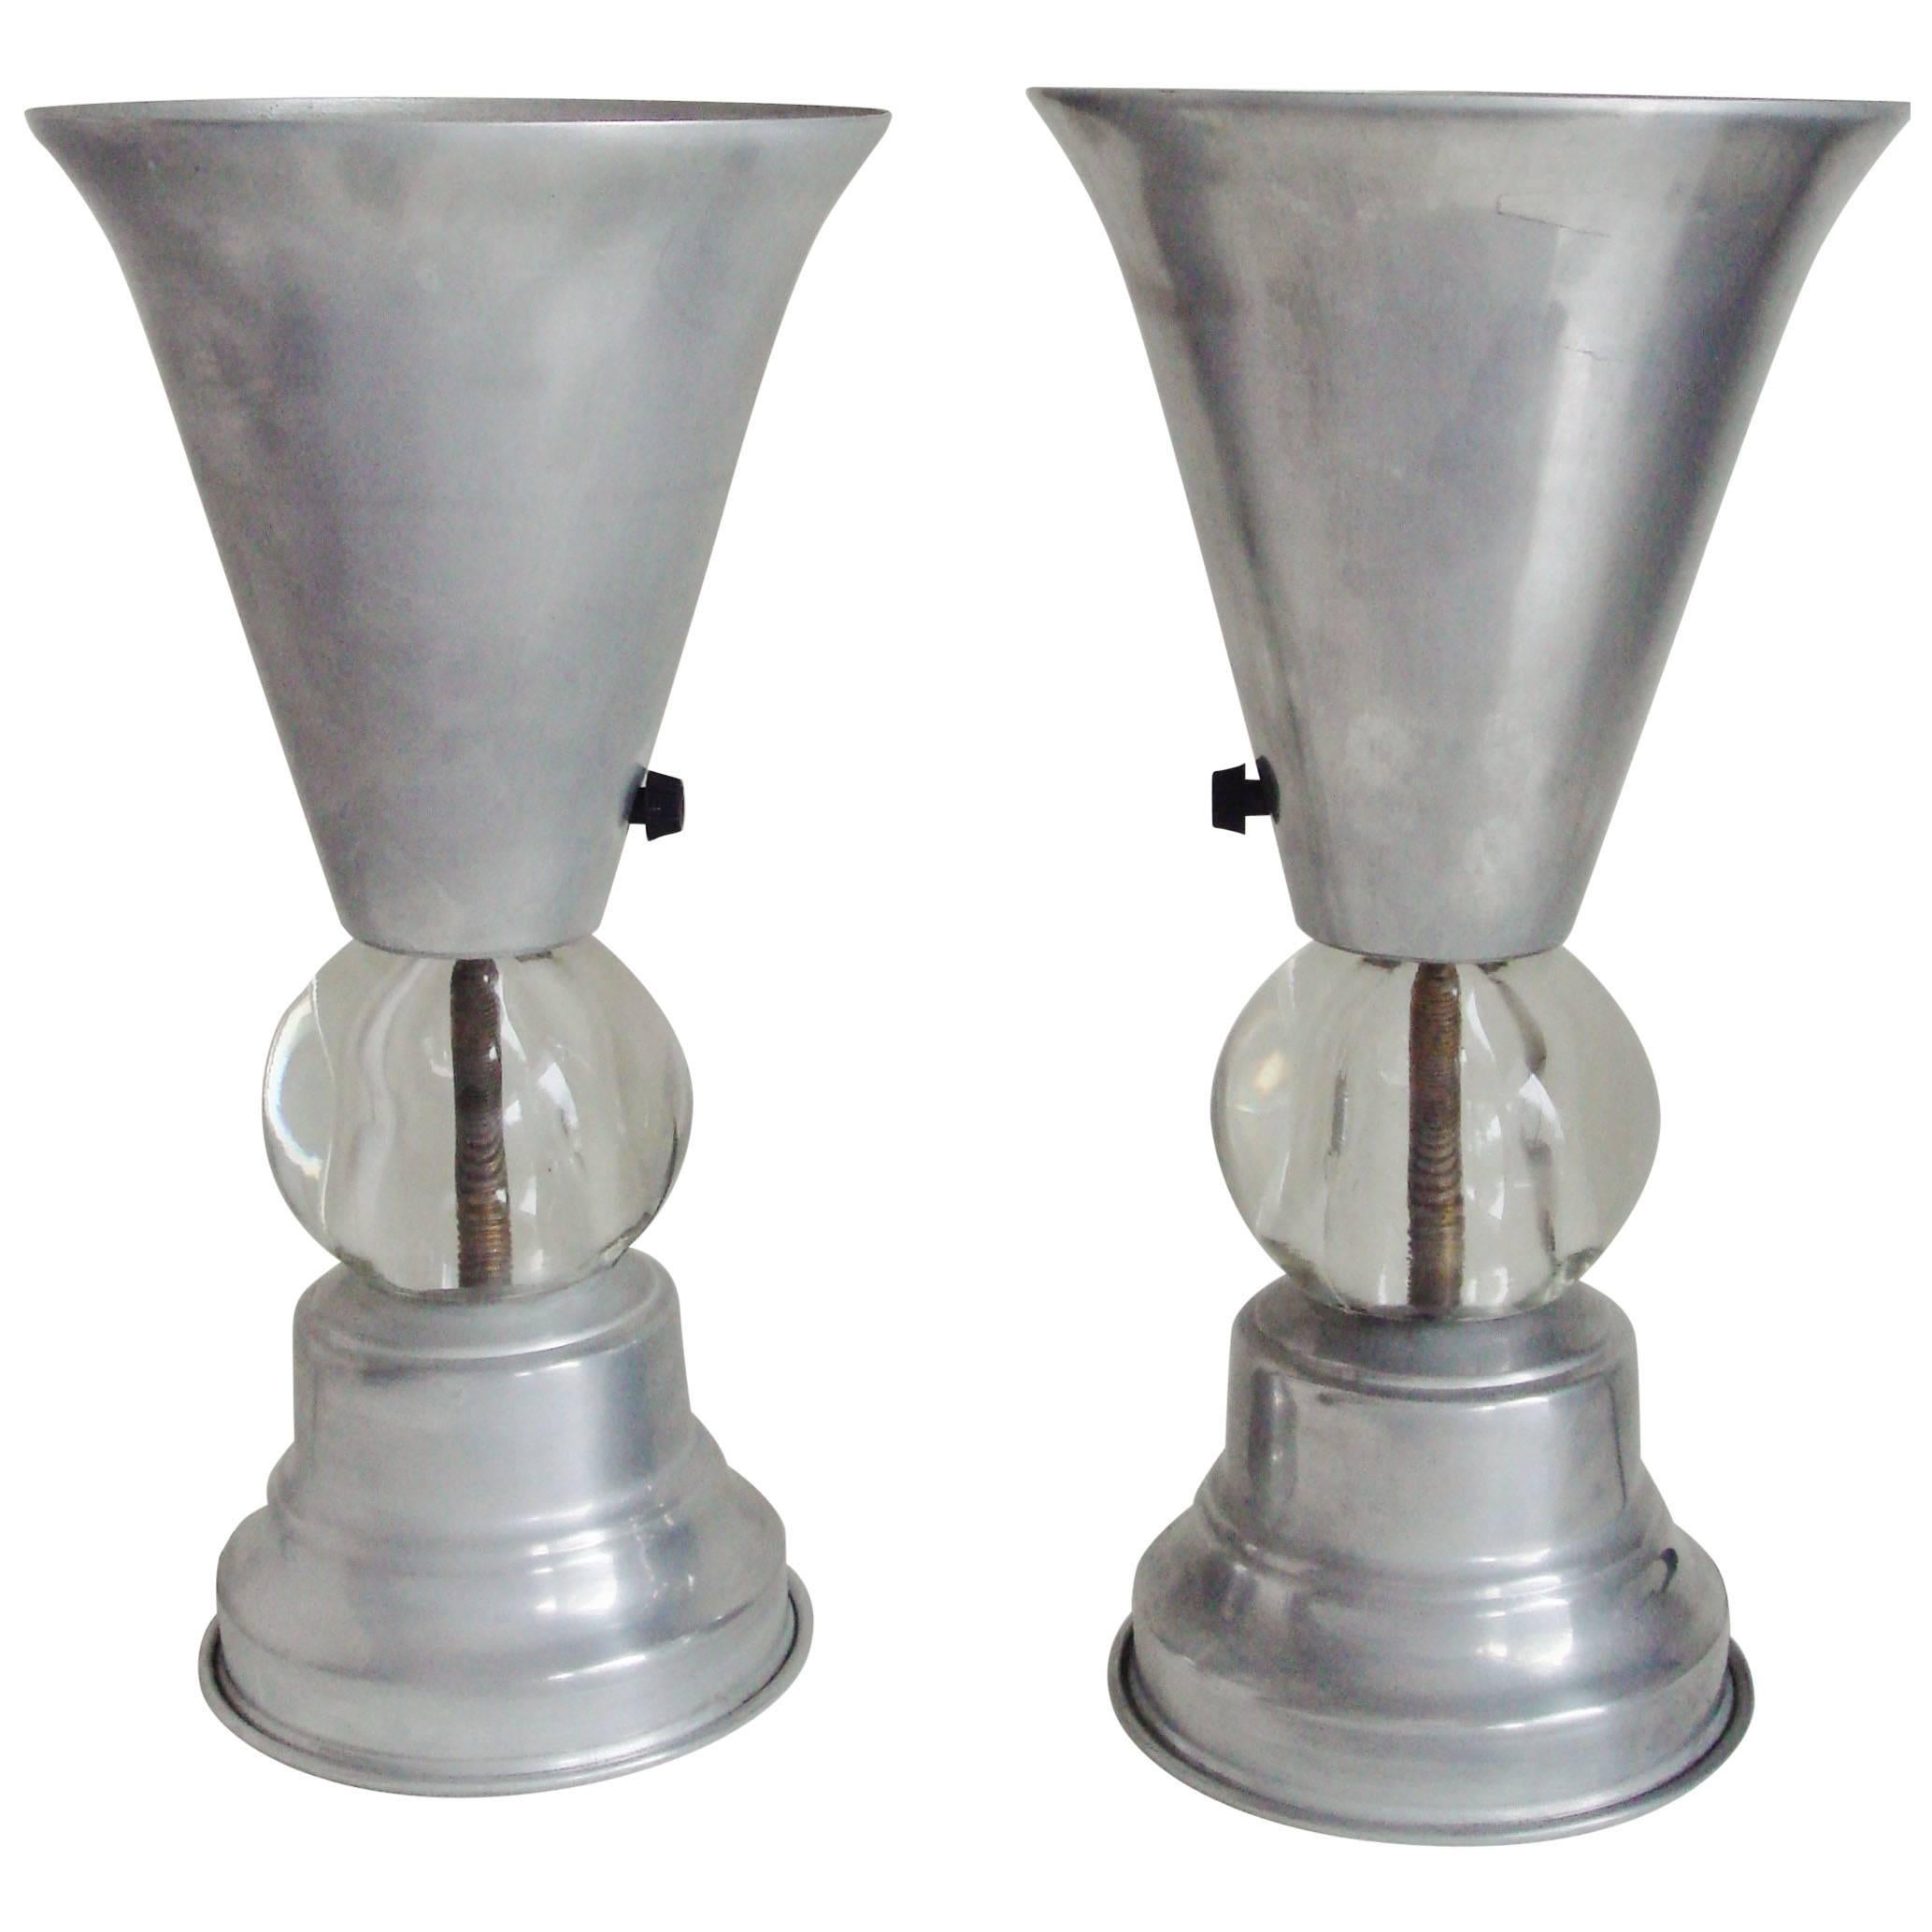 Pair of American Art Deco/Machine Age Aluminum and Glass Tabletop Torchieres For Sale